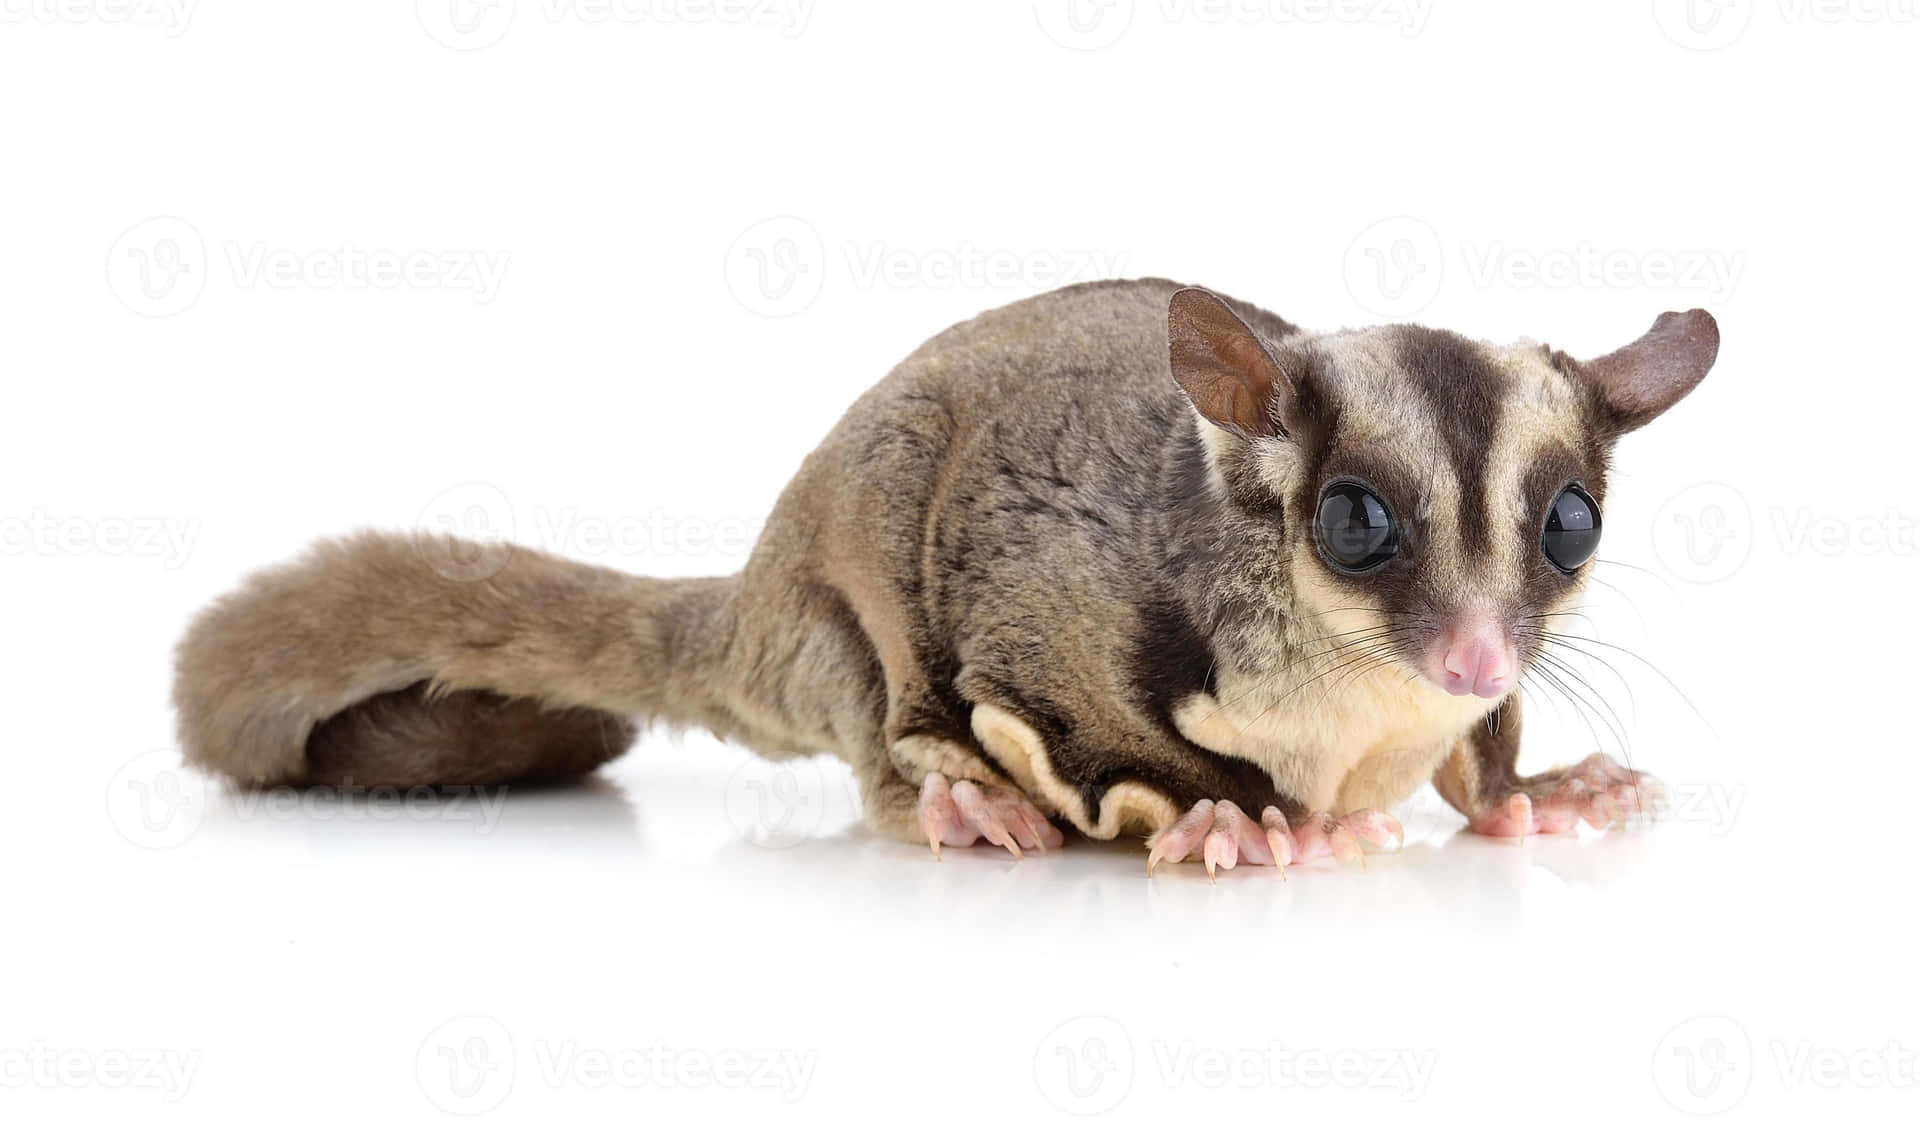 Soft, Fur Covered Marsupial That Thrives in High Trees